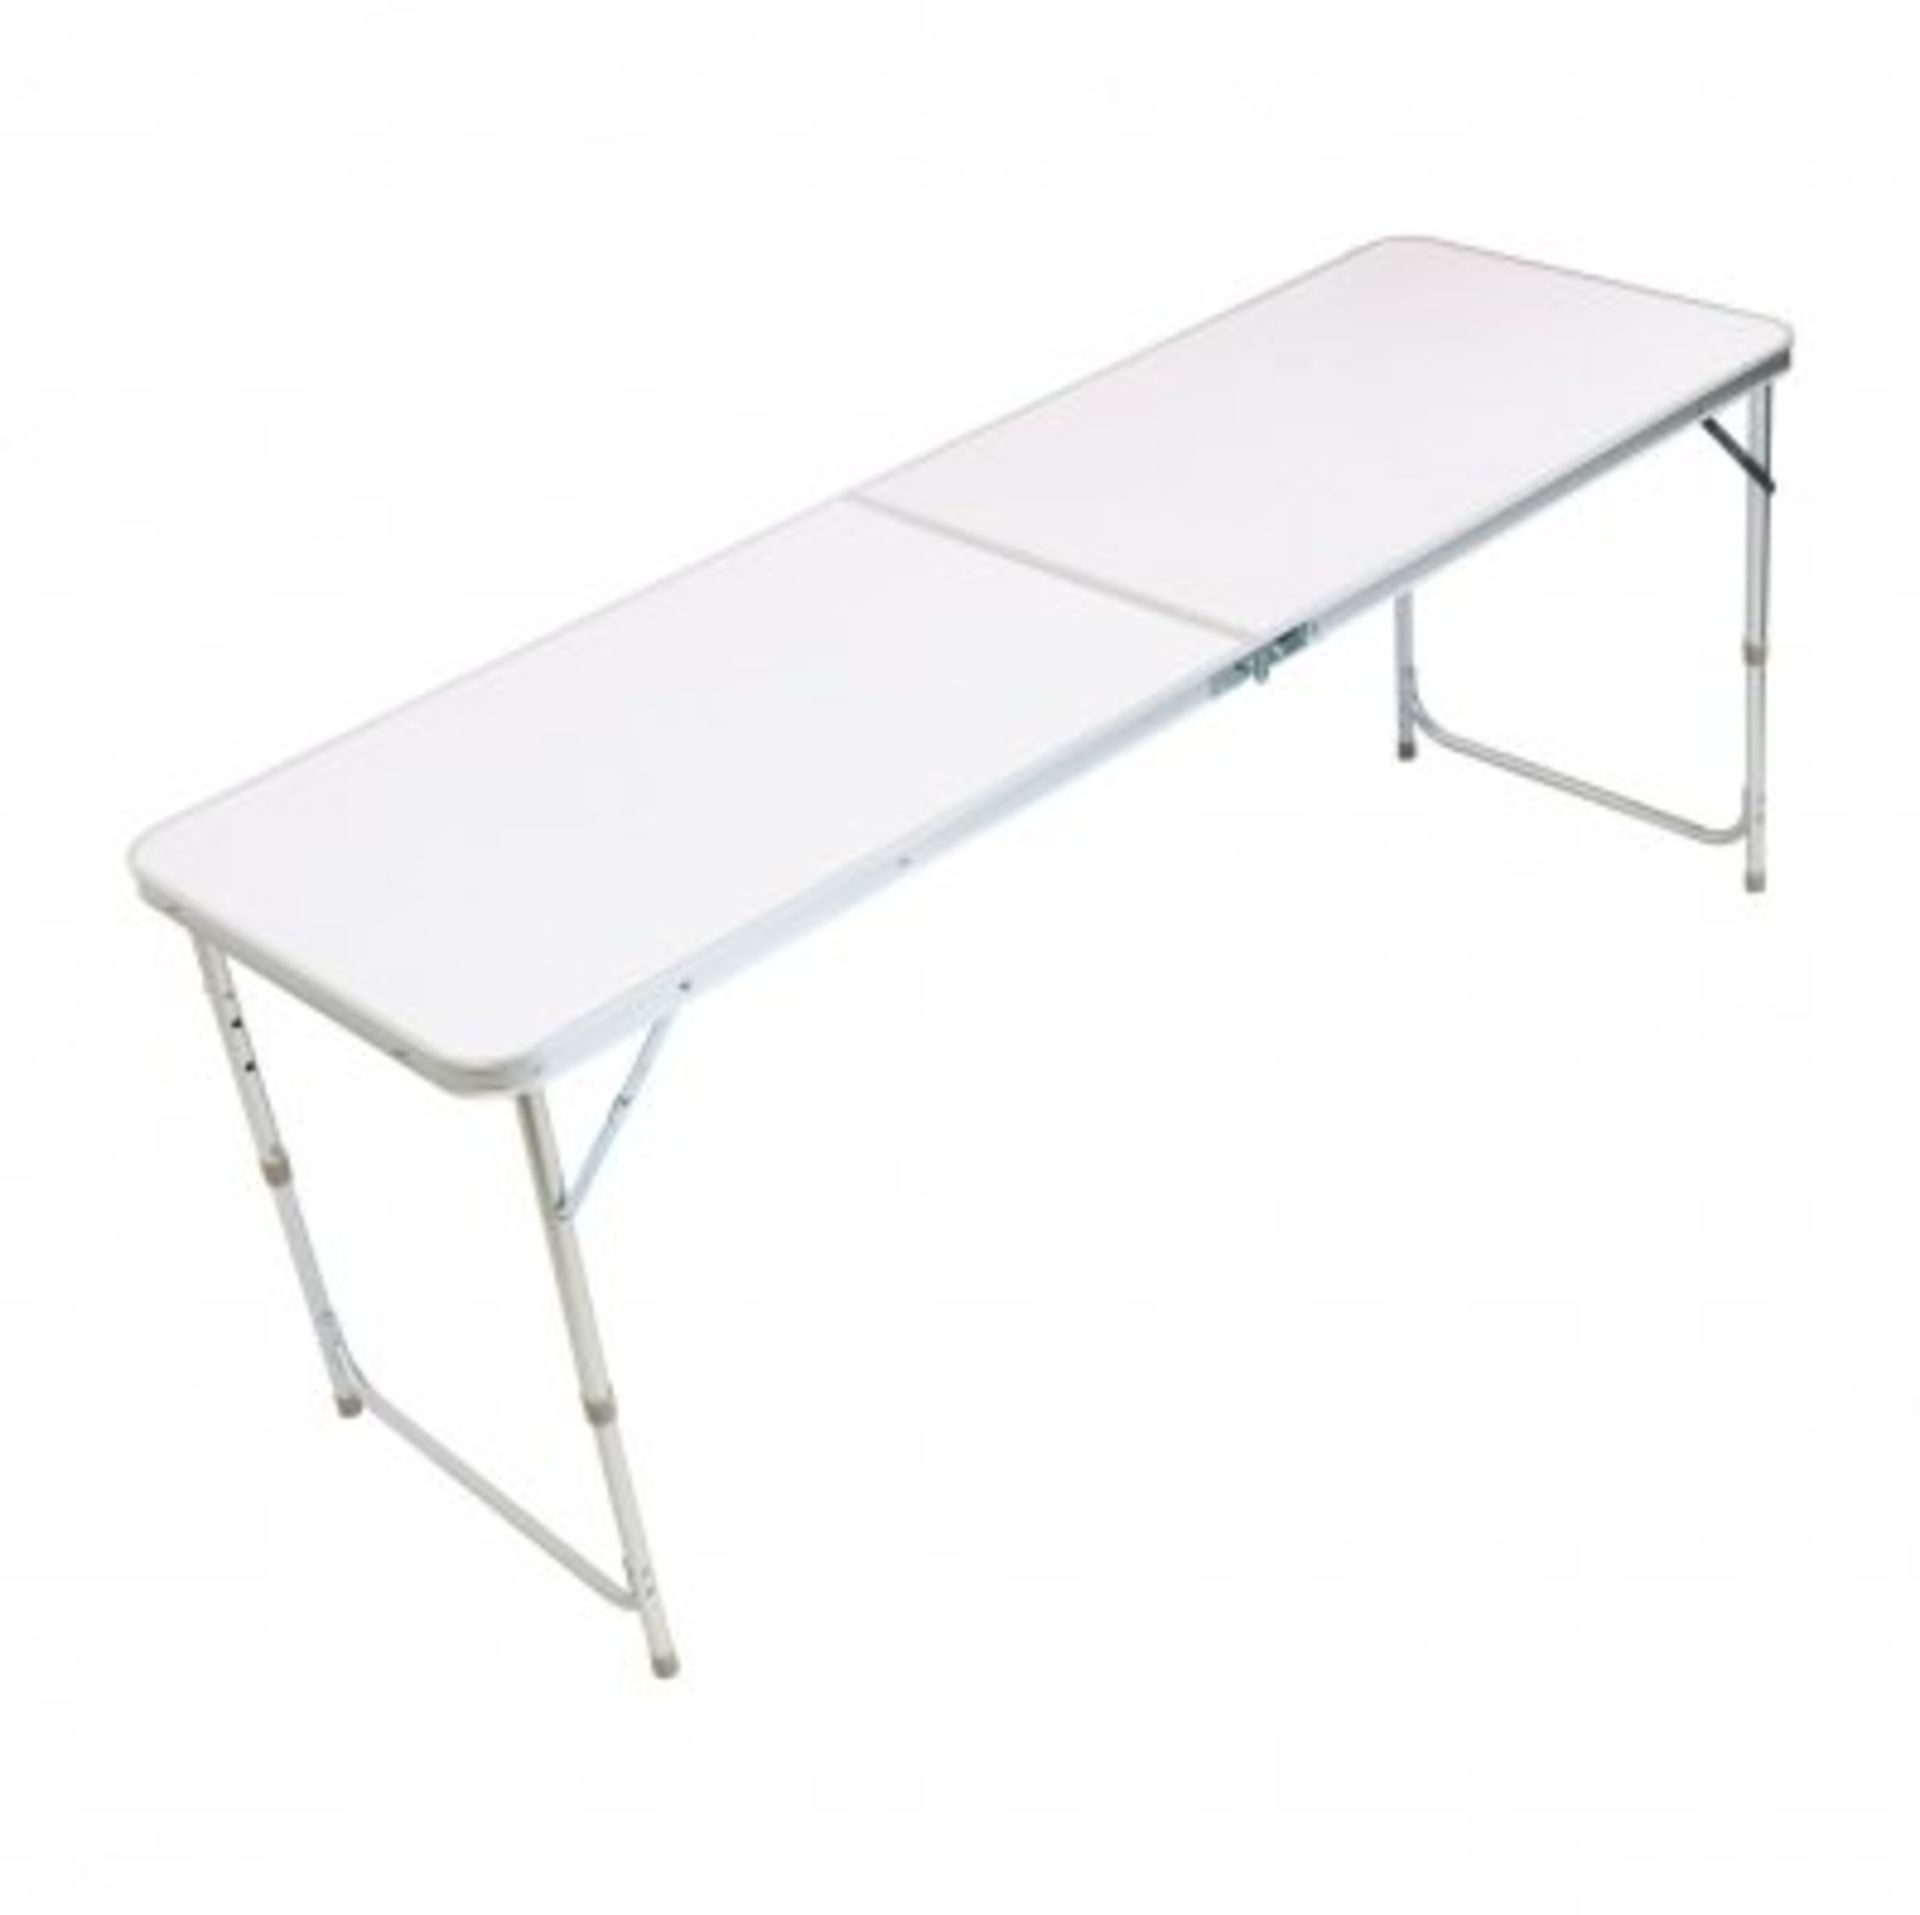 (SK12) 4ft Folding Outdoor Camping Kitchen Work Top Table The aluminium folding picnic table...